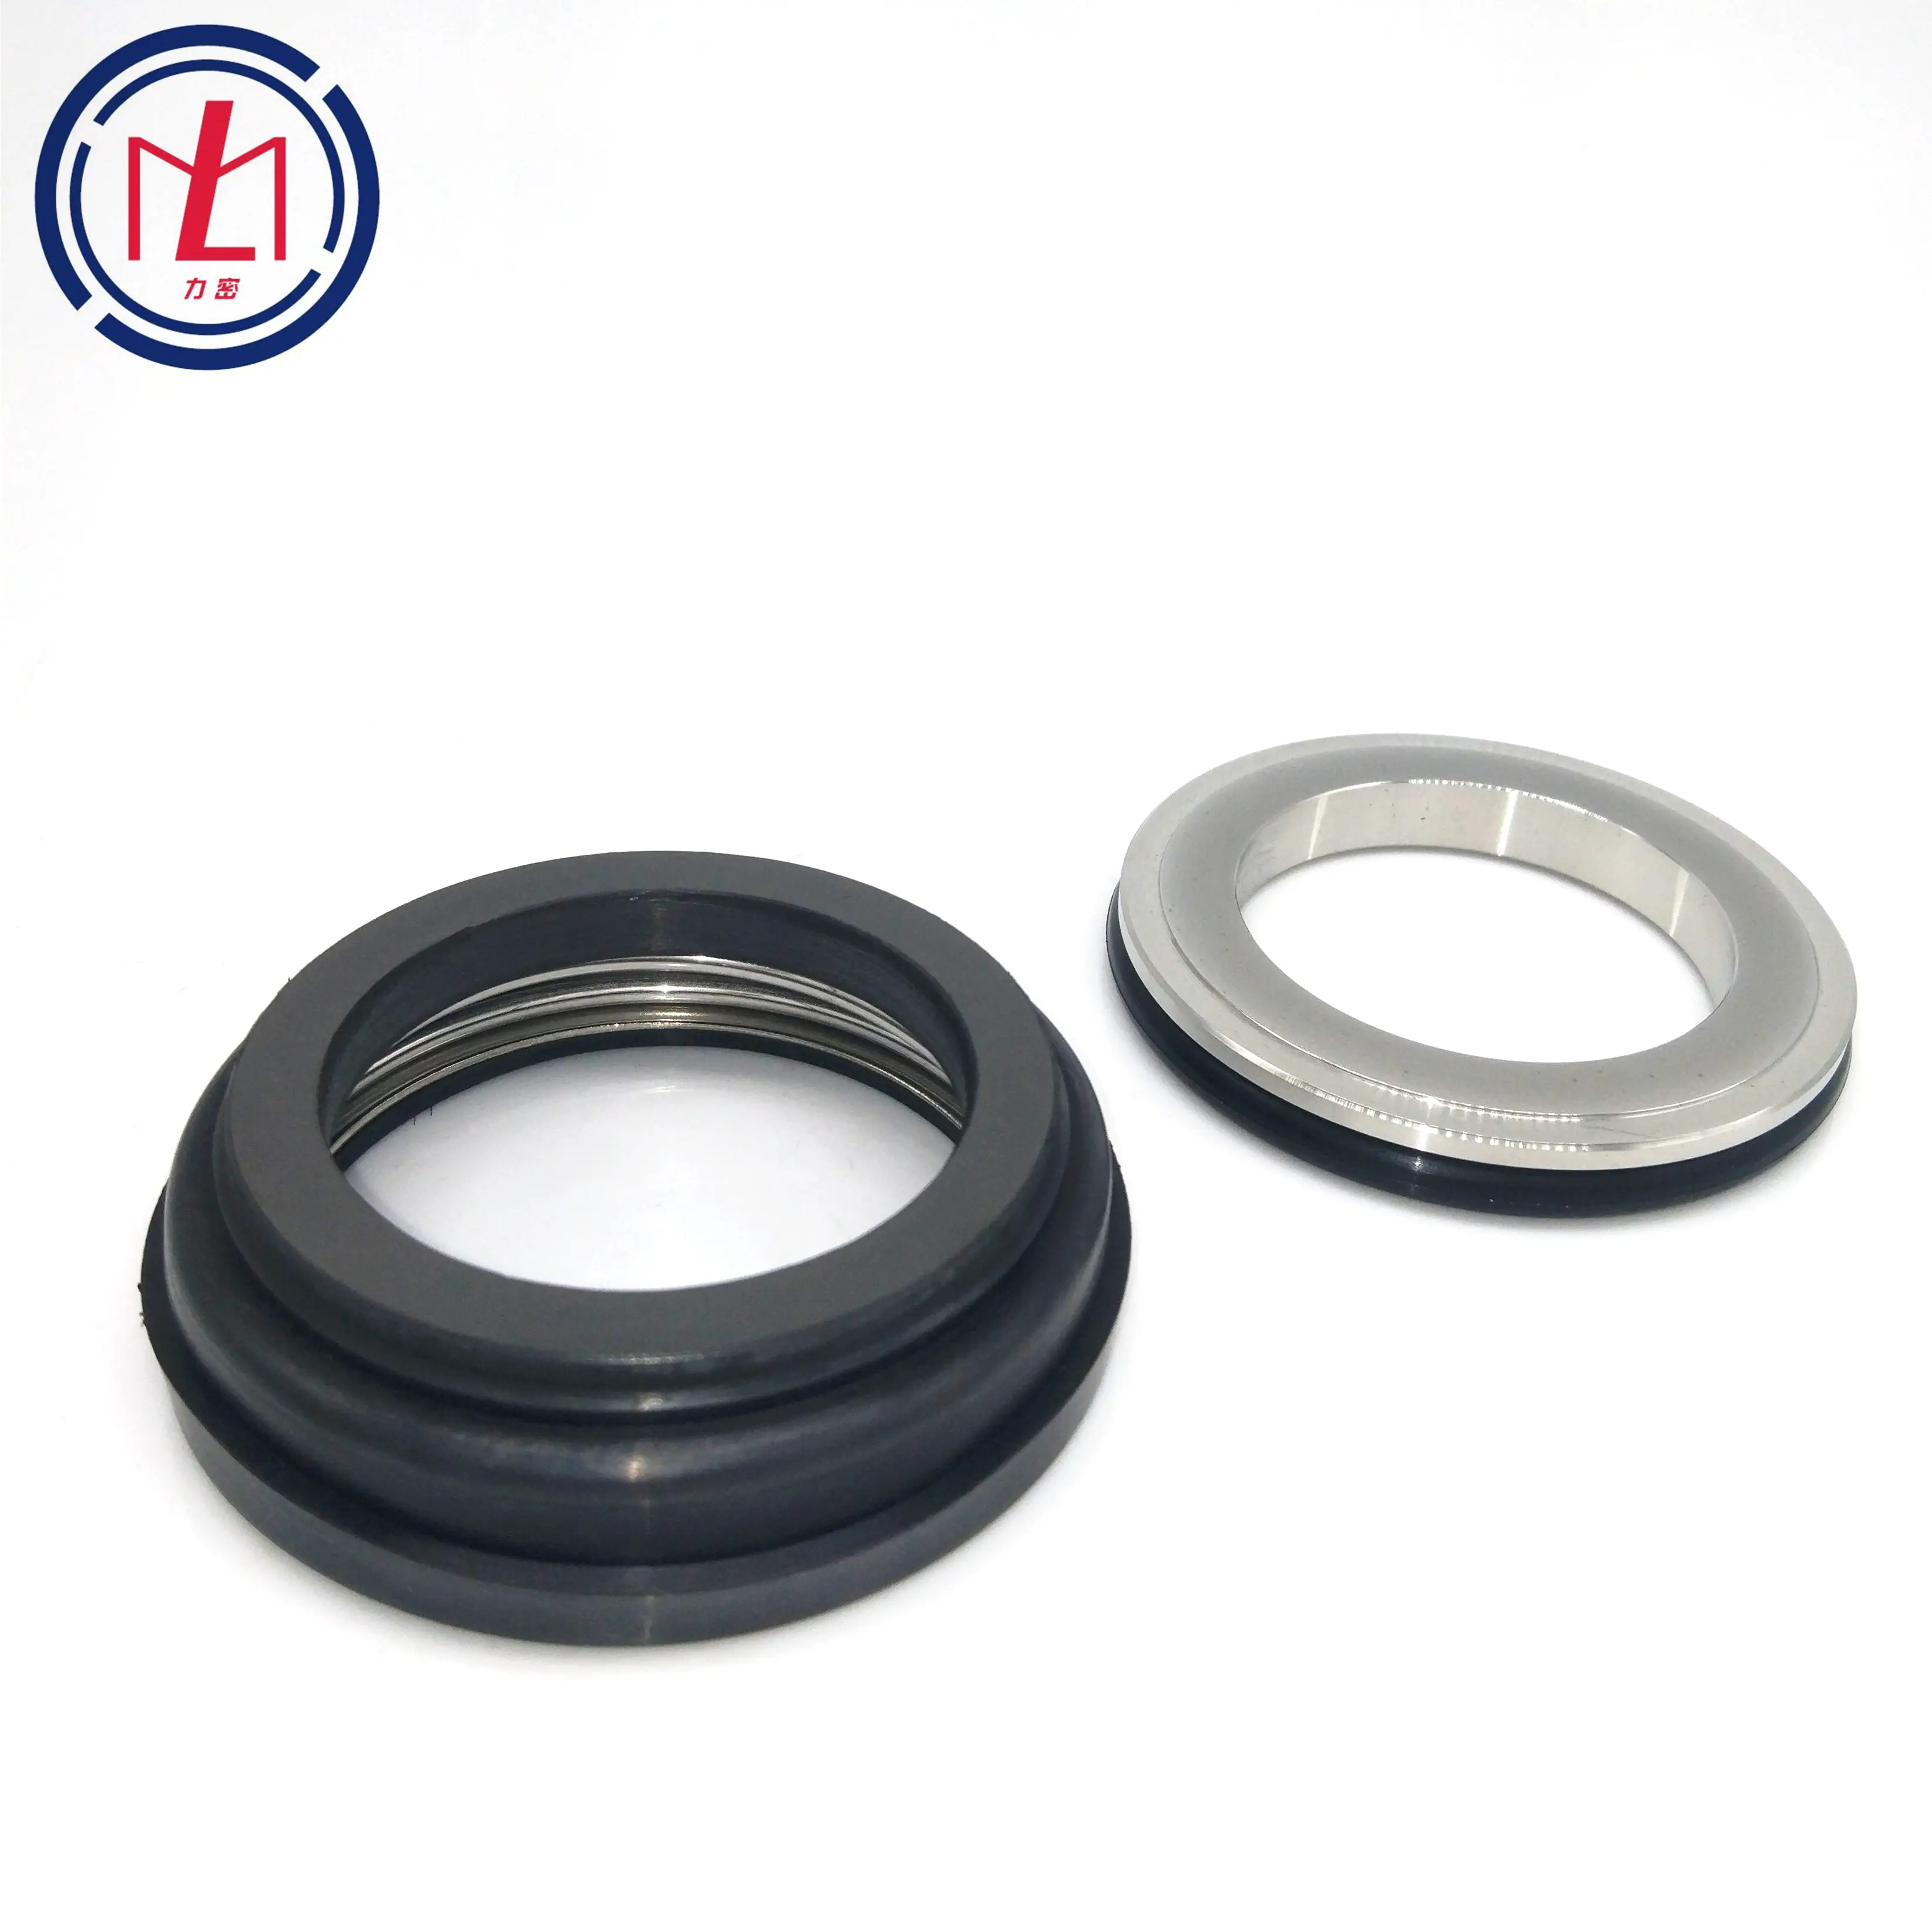 Flowserve MAC seal rubber 28 mechanical seal 44.4mm for sanitary pump